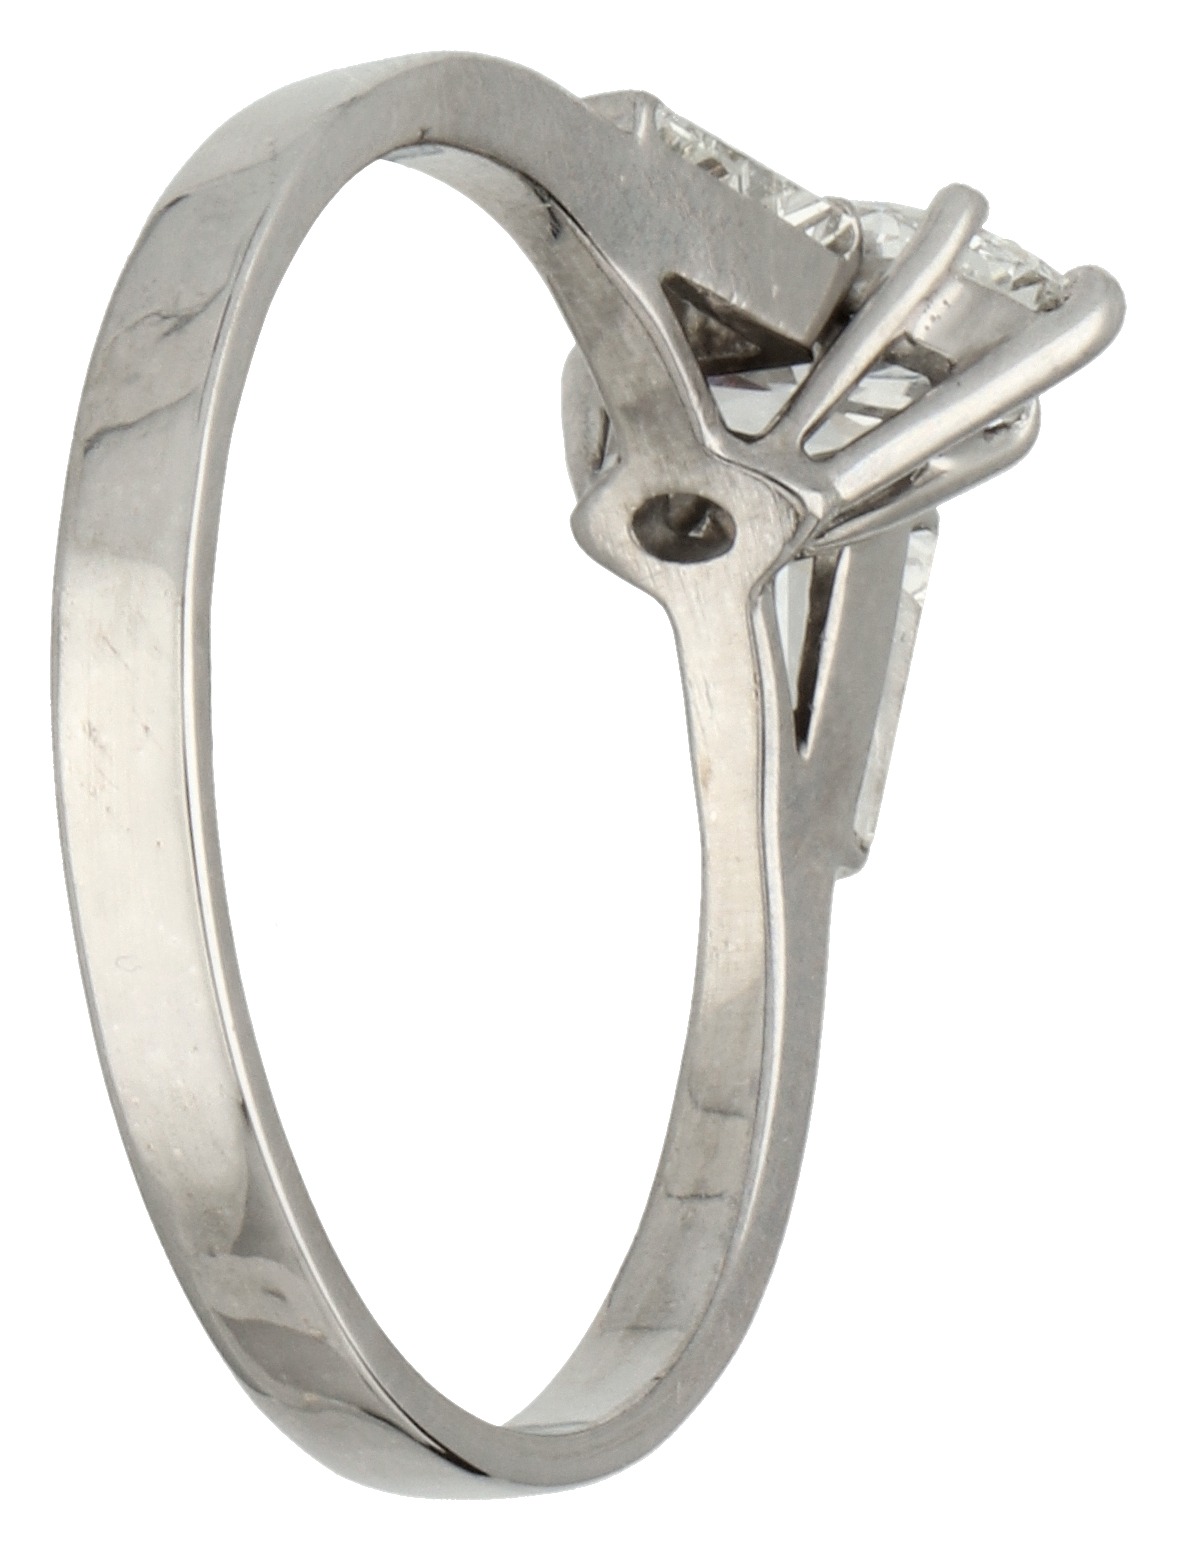 No Reserve - 18K White gold shoulder ring set with approx. 0.50 ct. marquise cut diamond. - Image 2 of 4